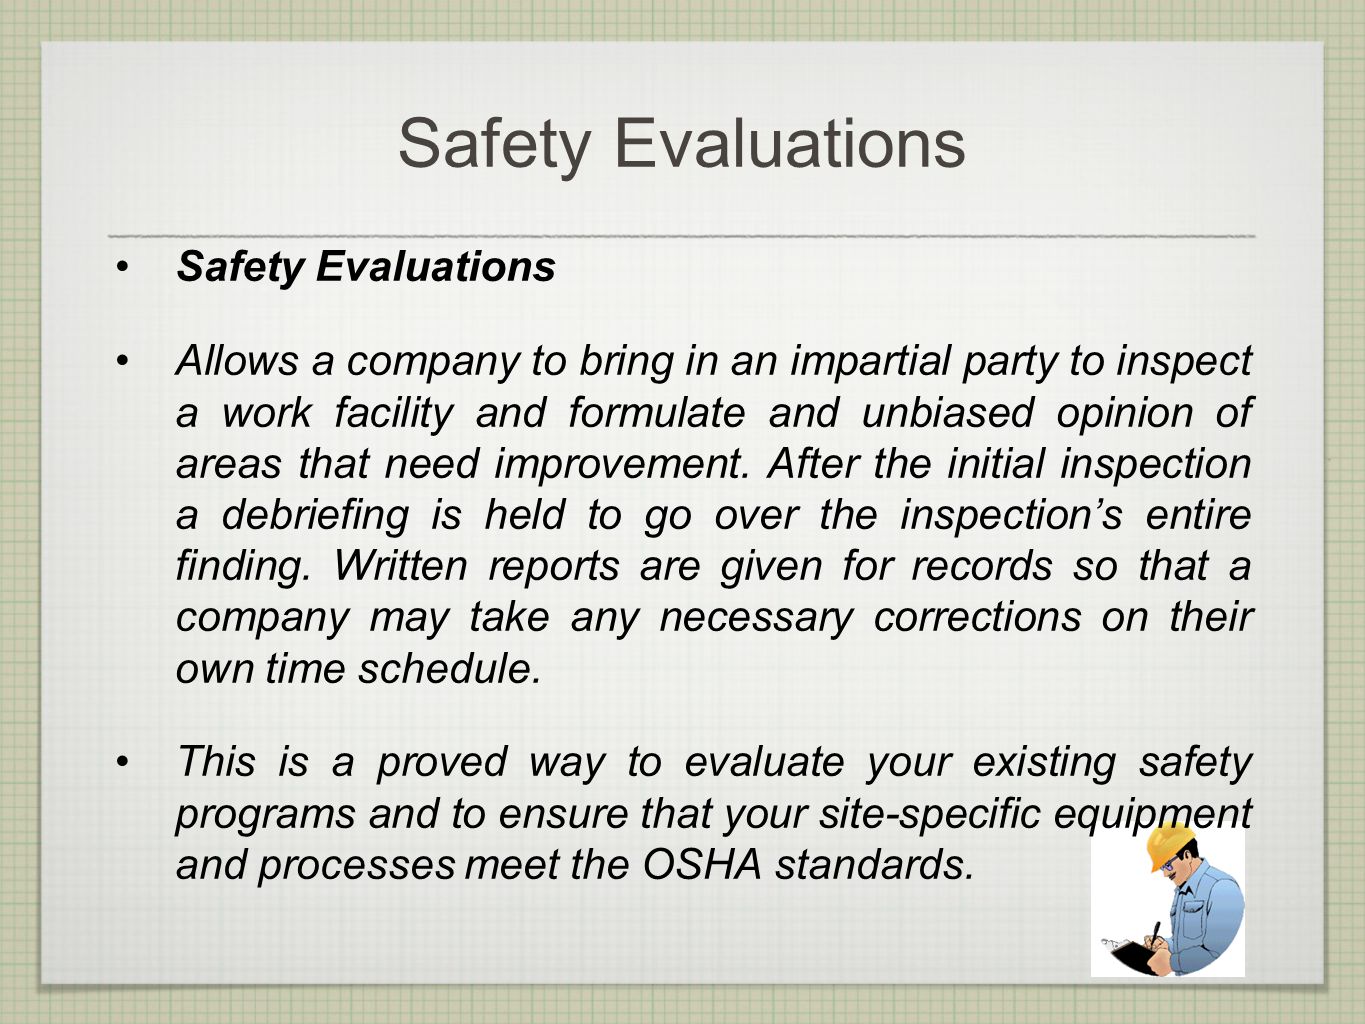 Safety Evaluations Allows a company to bring in an impartial party to inspect a work facility and formulate and unbiased opinion of areas that need improvement.